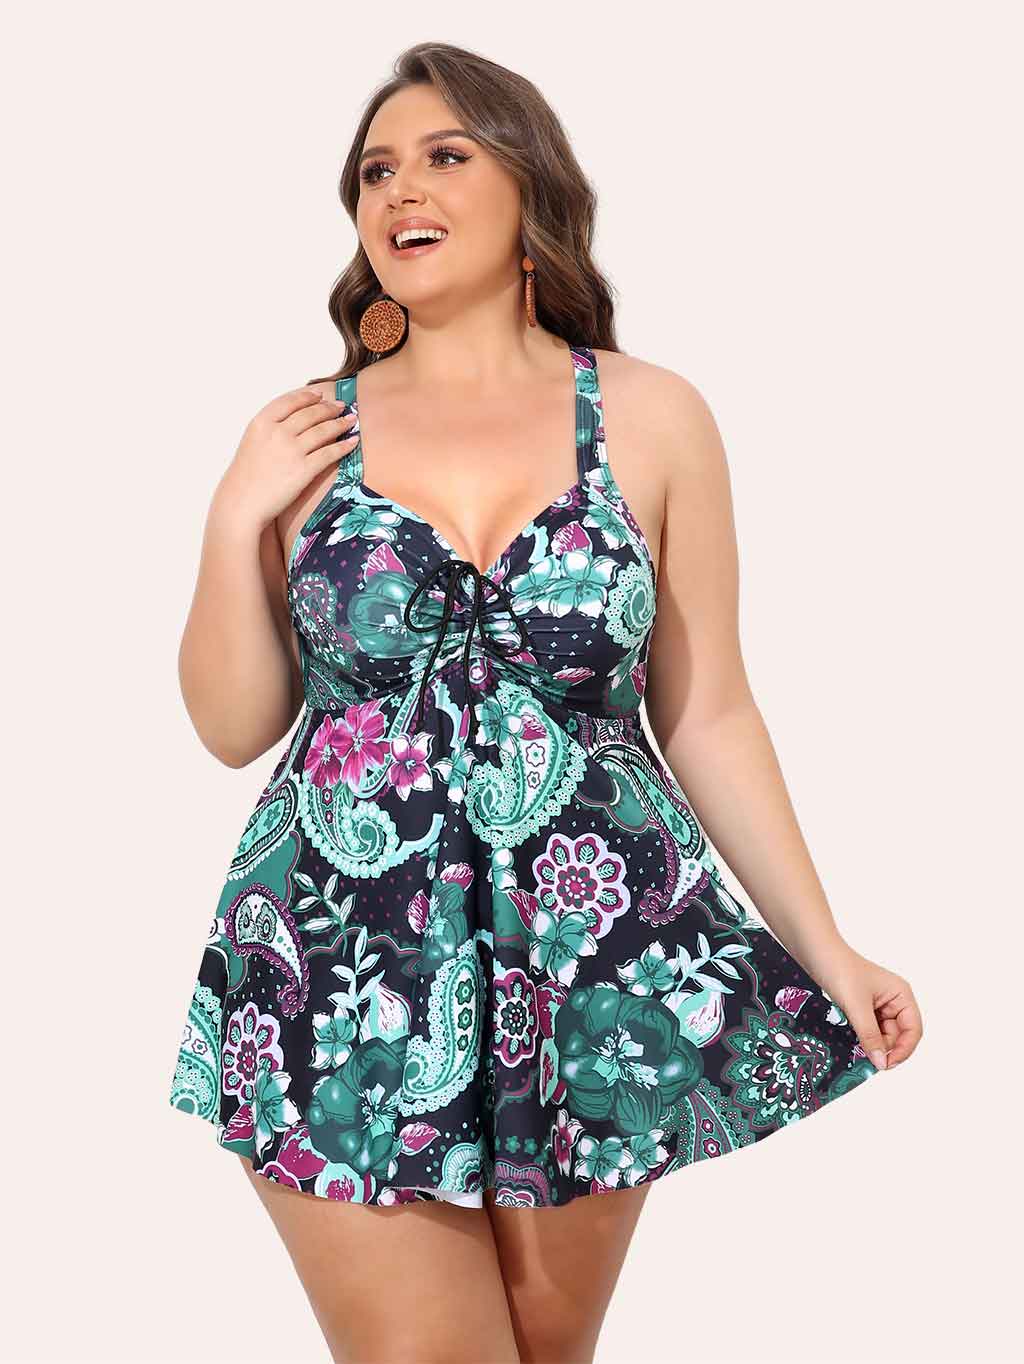 Nieyook Plus Size Swimsuit Floral Green